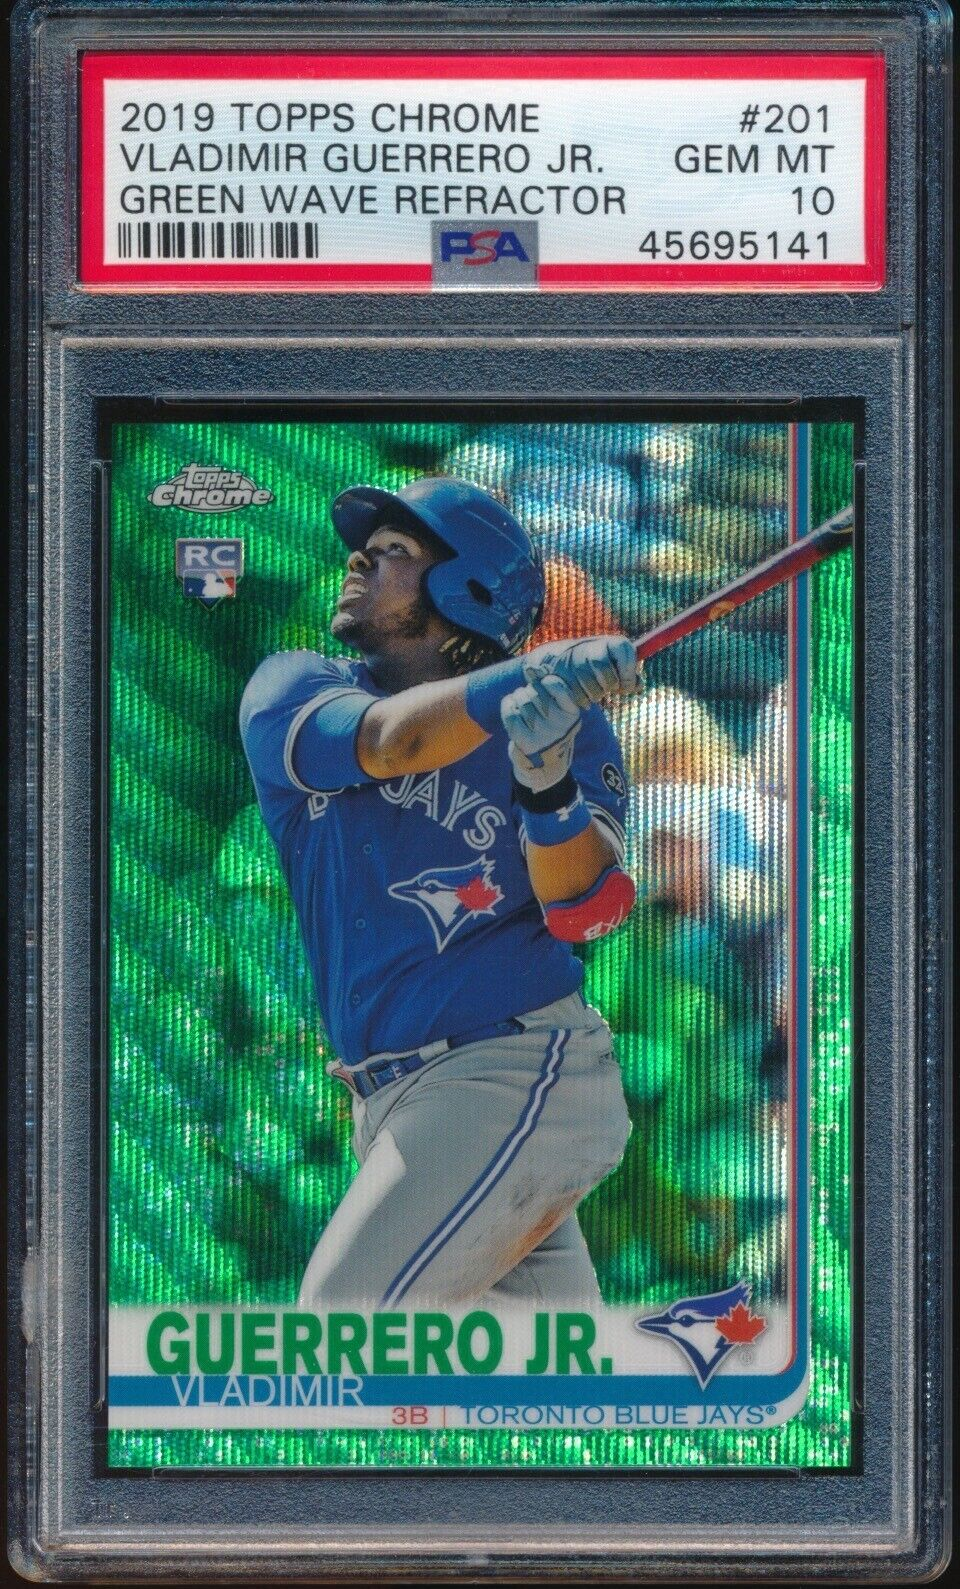 Most valuable Vladimir Guerrero Jr rookie cards: 2019 Topps Chrome Green Wave